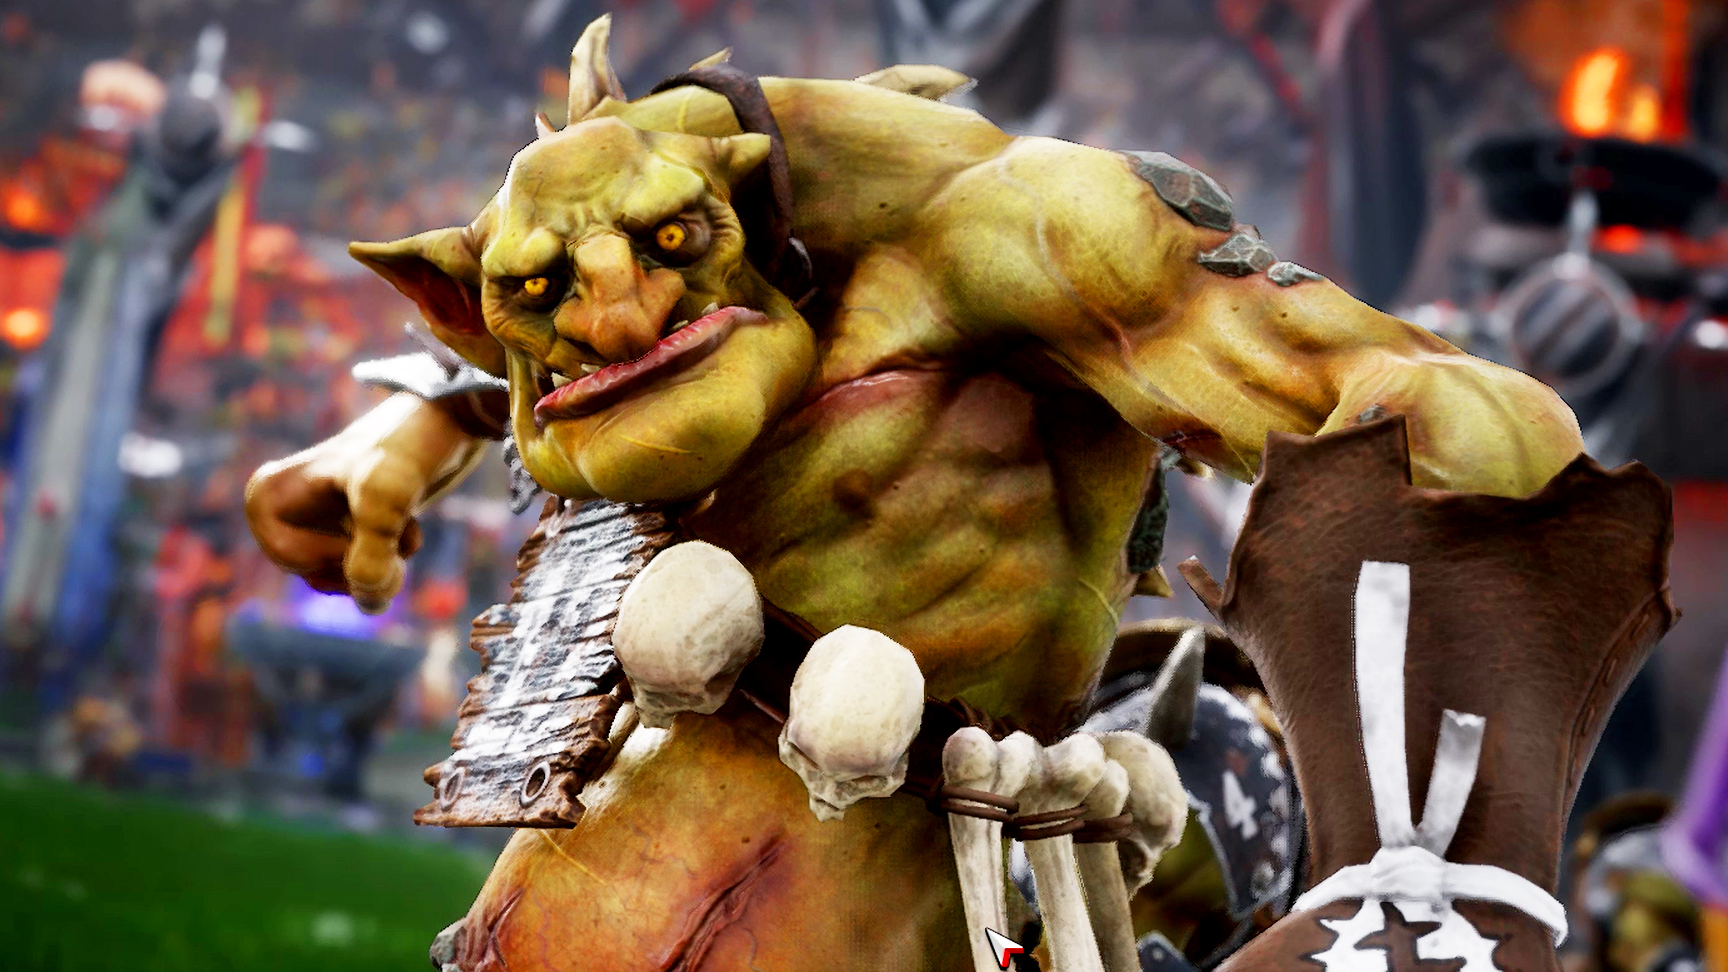 Blood Bowl 3 - Imperial Nobility Edition | ROW 1 (911355c2-c242-4b1f-aa62-8fa685700a96)